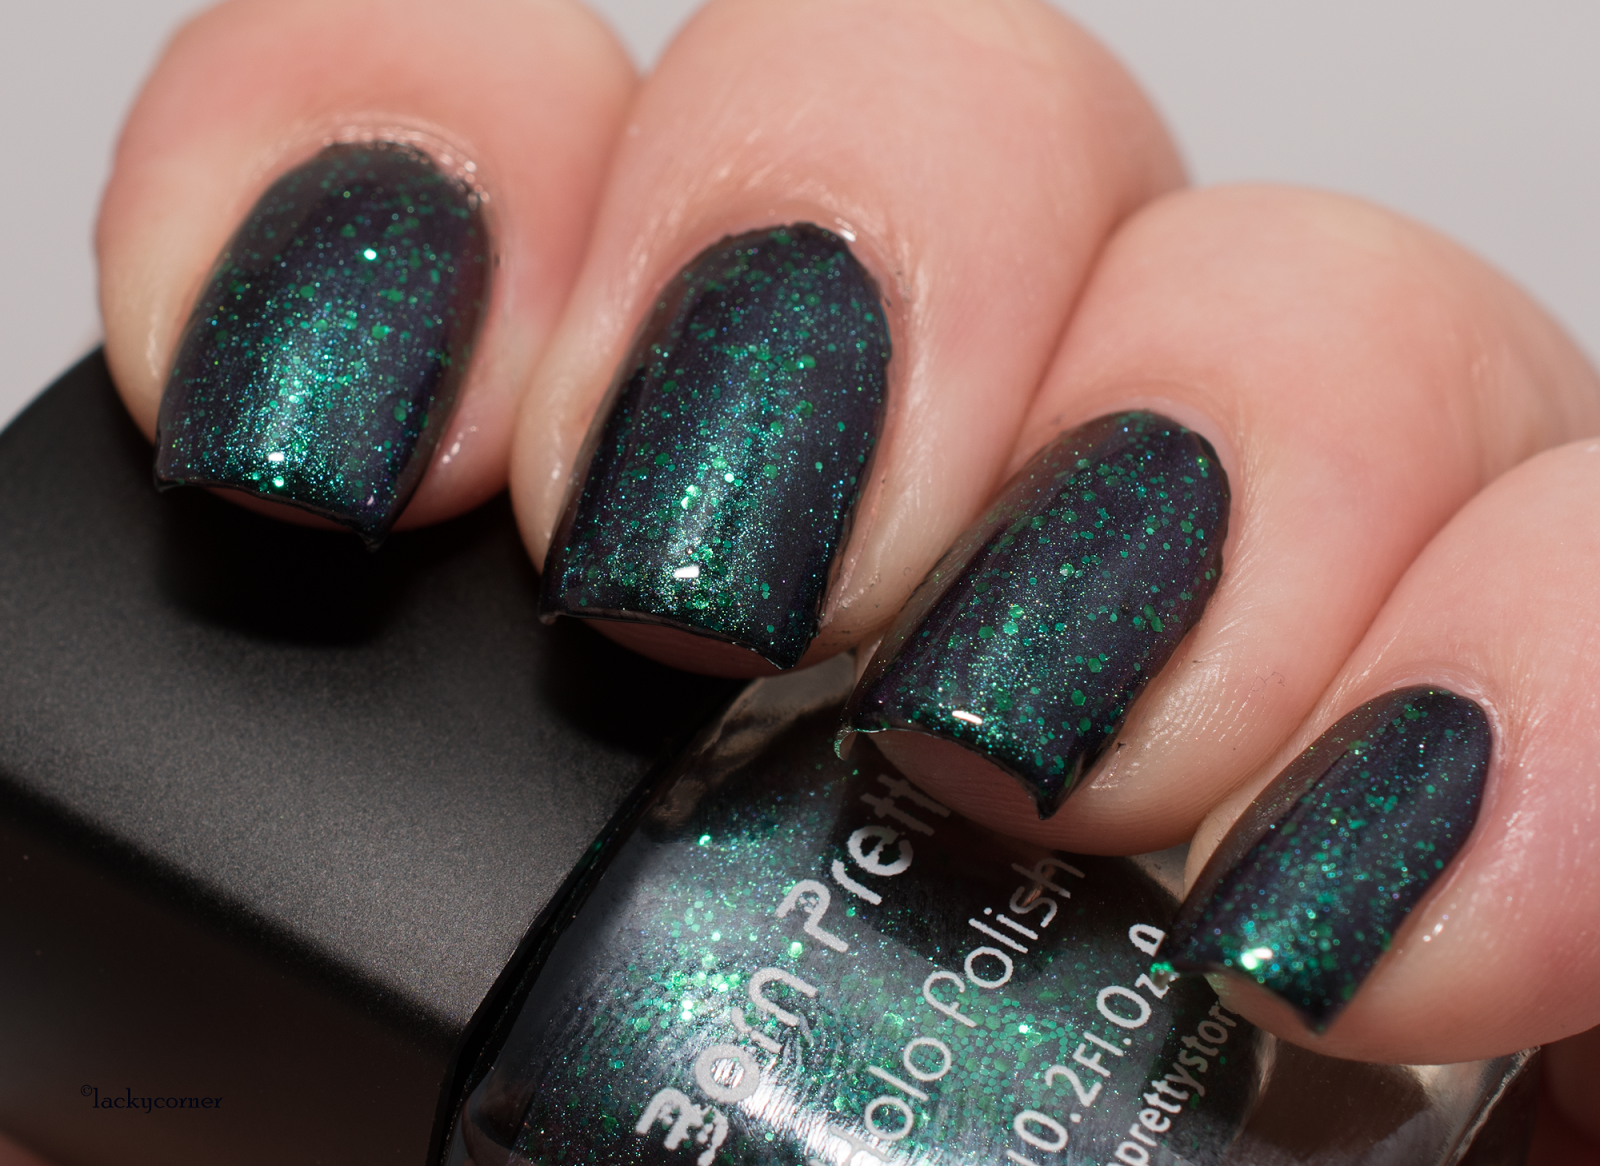 10. Butter London Nail Lacquer in "Chameleon" - wide 8